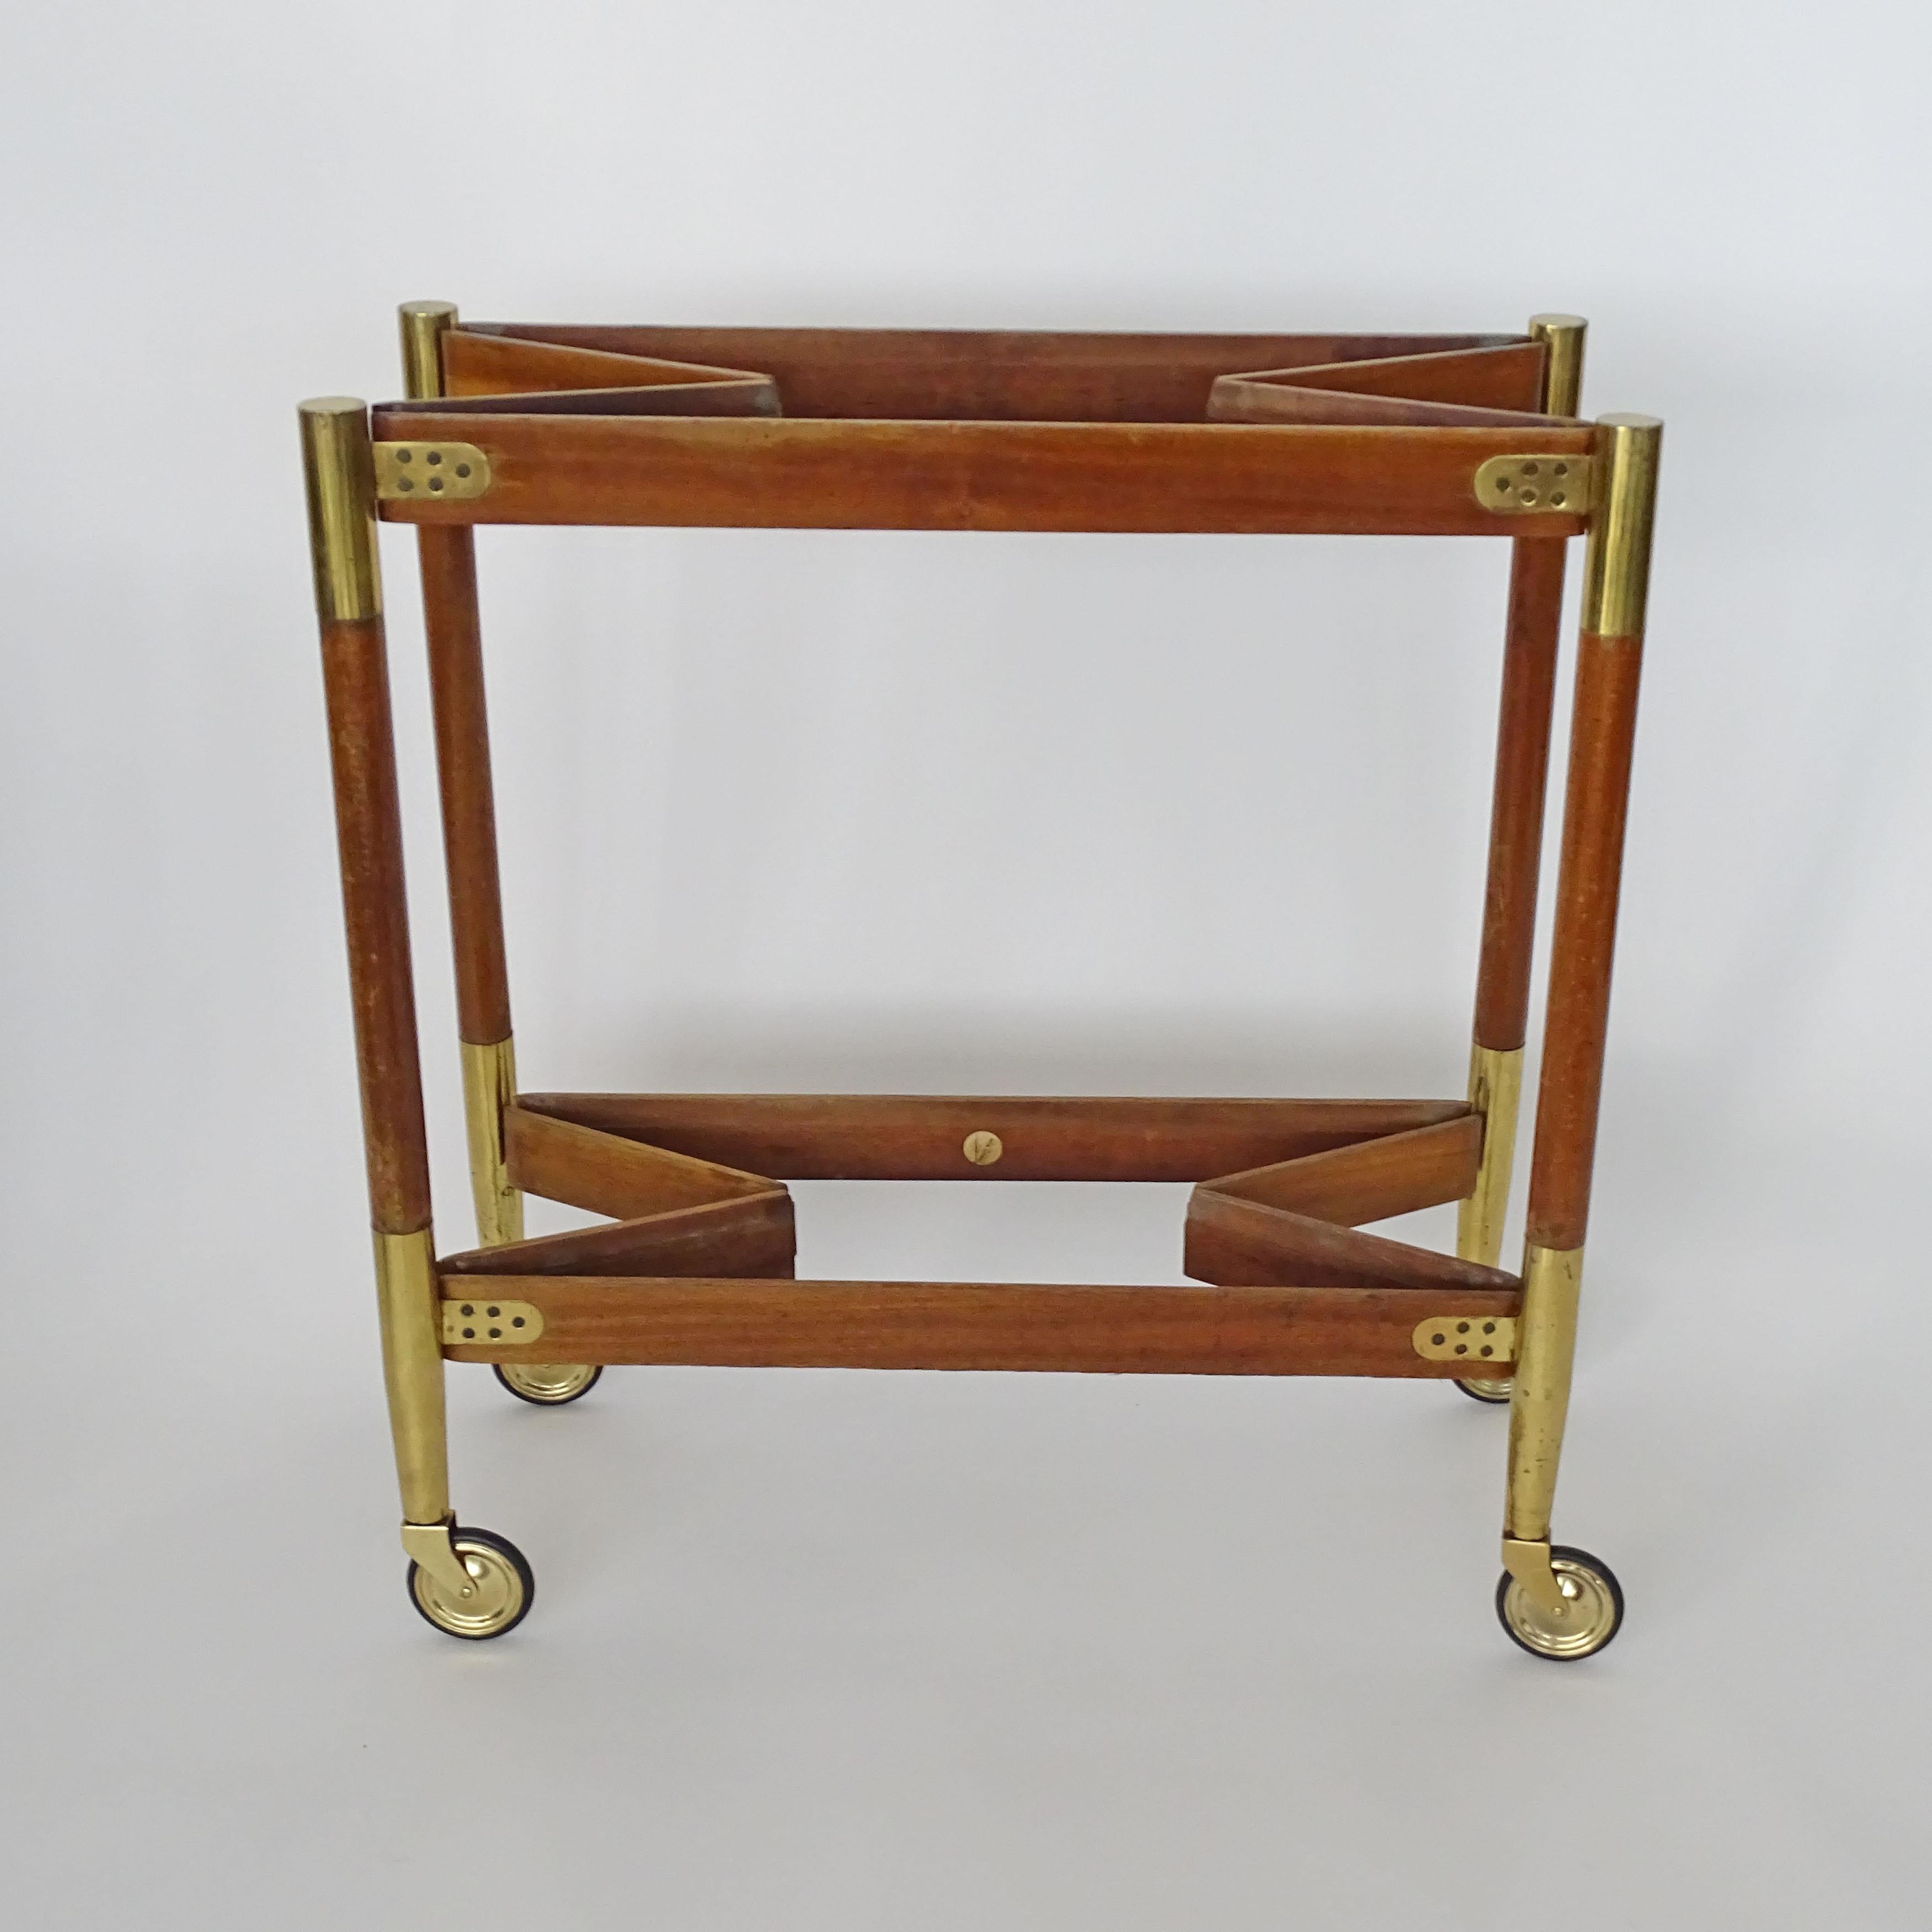 Piero Fornasetti Wood and Brass Folding Trolley, Italy, 1950s For Sale 2